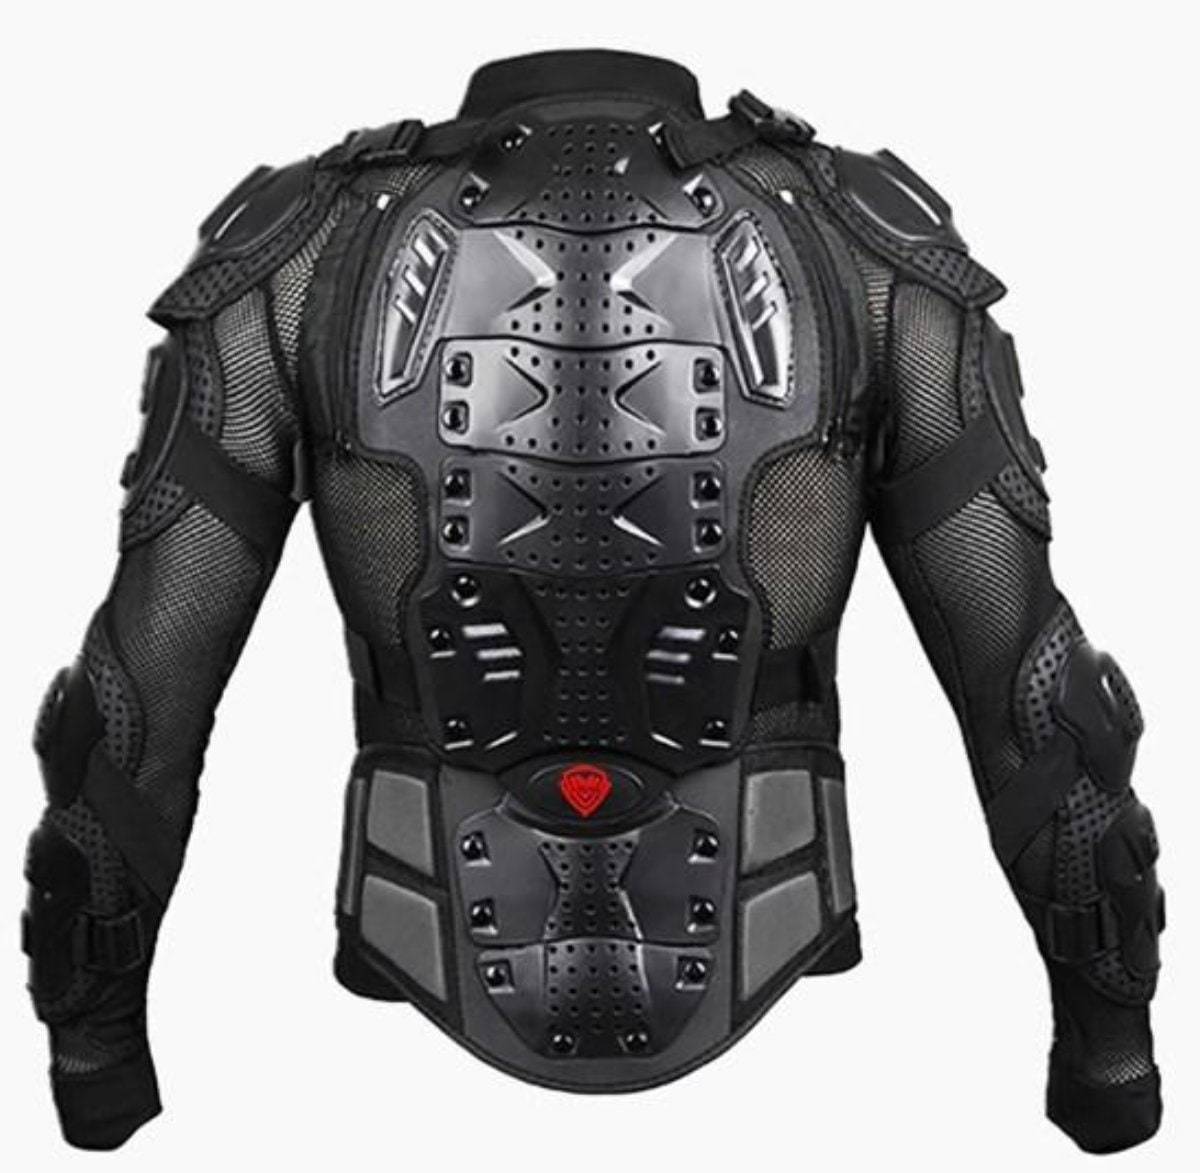 Amazon.com: Motorcycle Protective Jacket Full Body Armor, Chest Spine  Protection Dirt Bike Gear for Men Motocross MTB Racing : Automotive